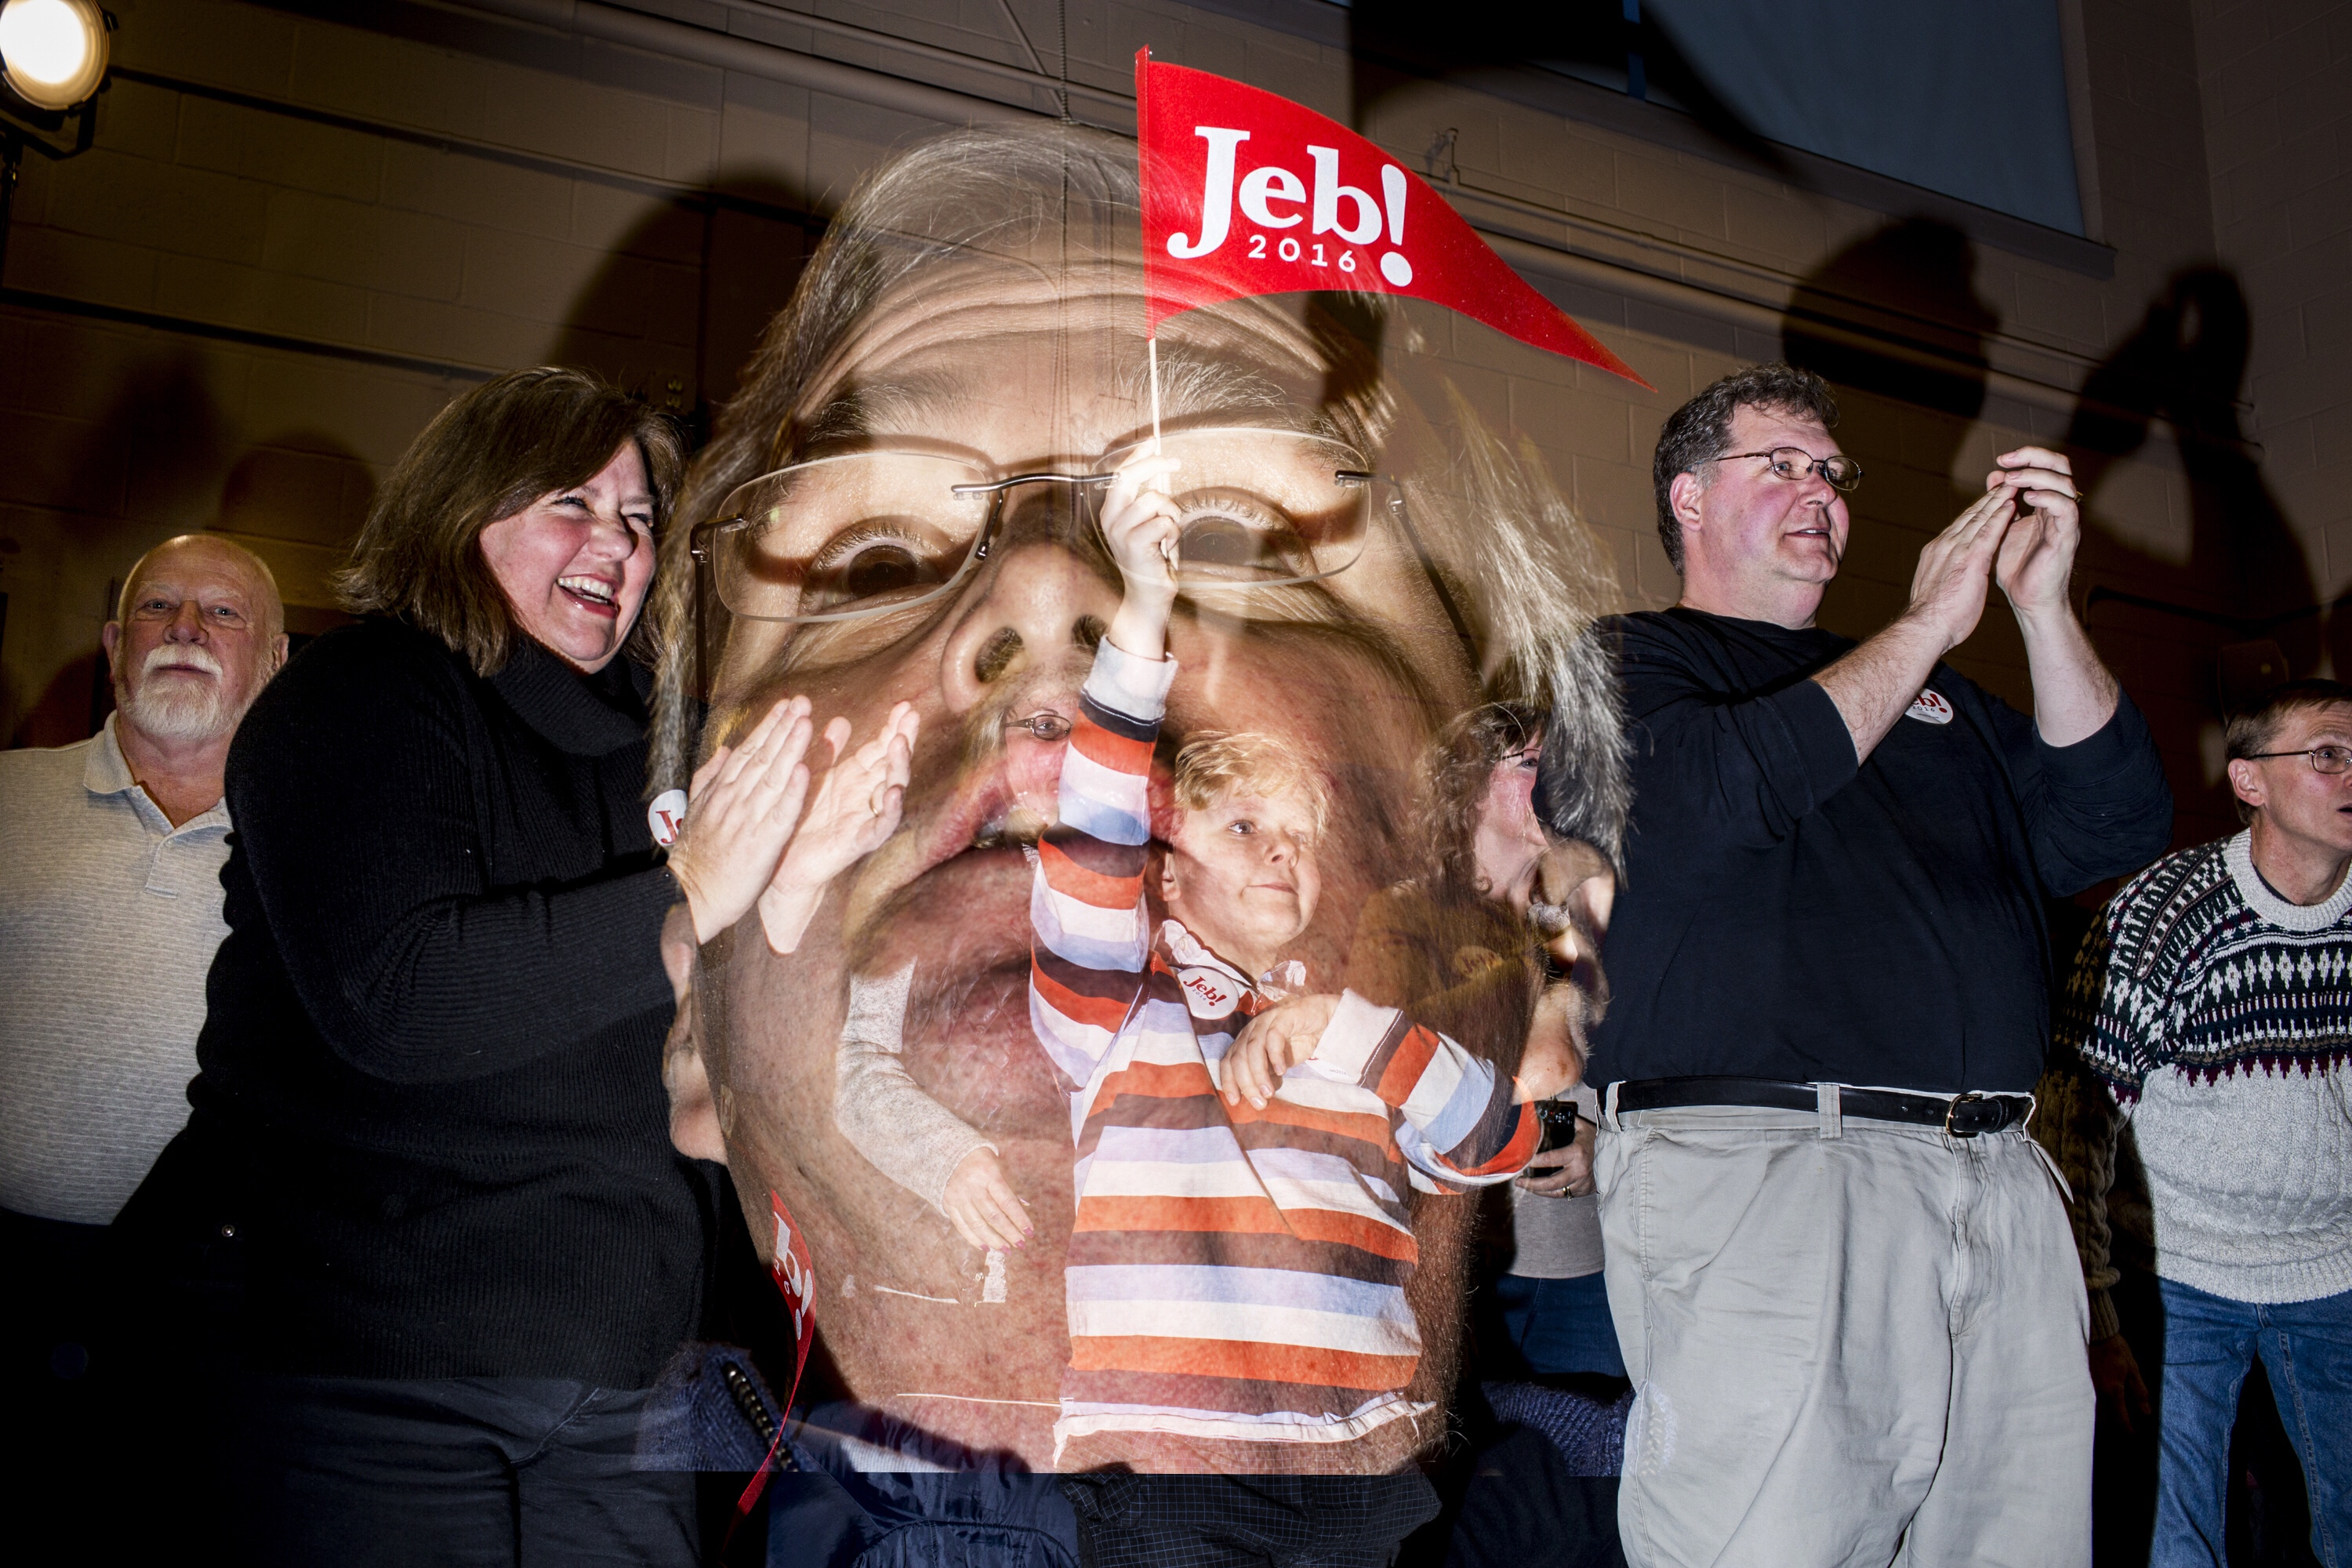 This double exposure image shows Republican presidential candidate Jeb Bush speaking to attendees at a town hall meeting in Pelham, N.H. on Jan 23, 2016.